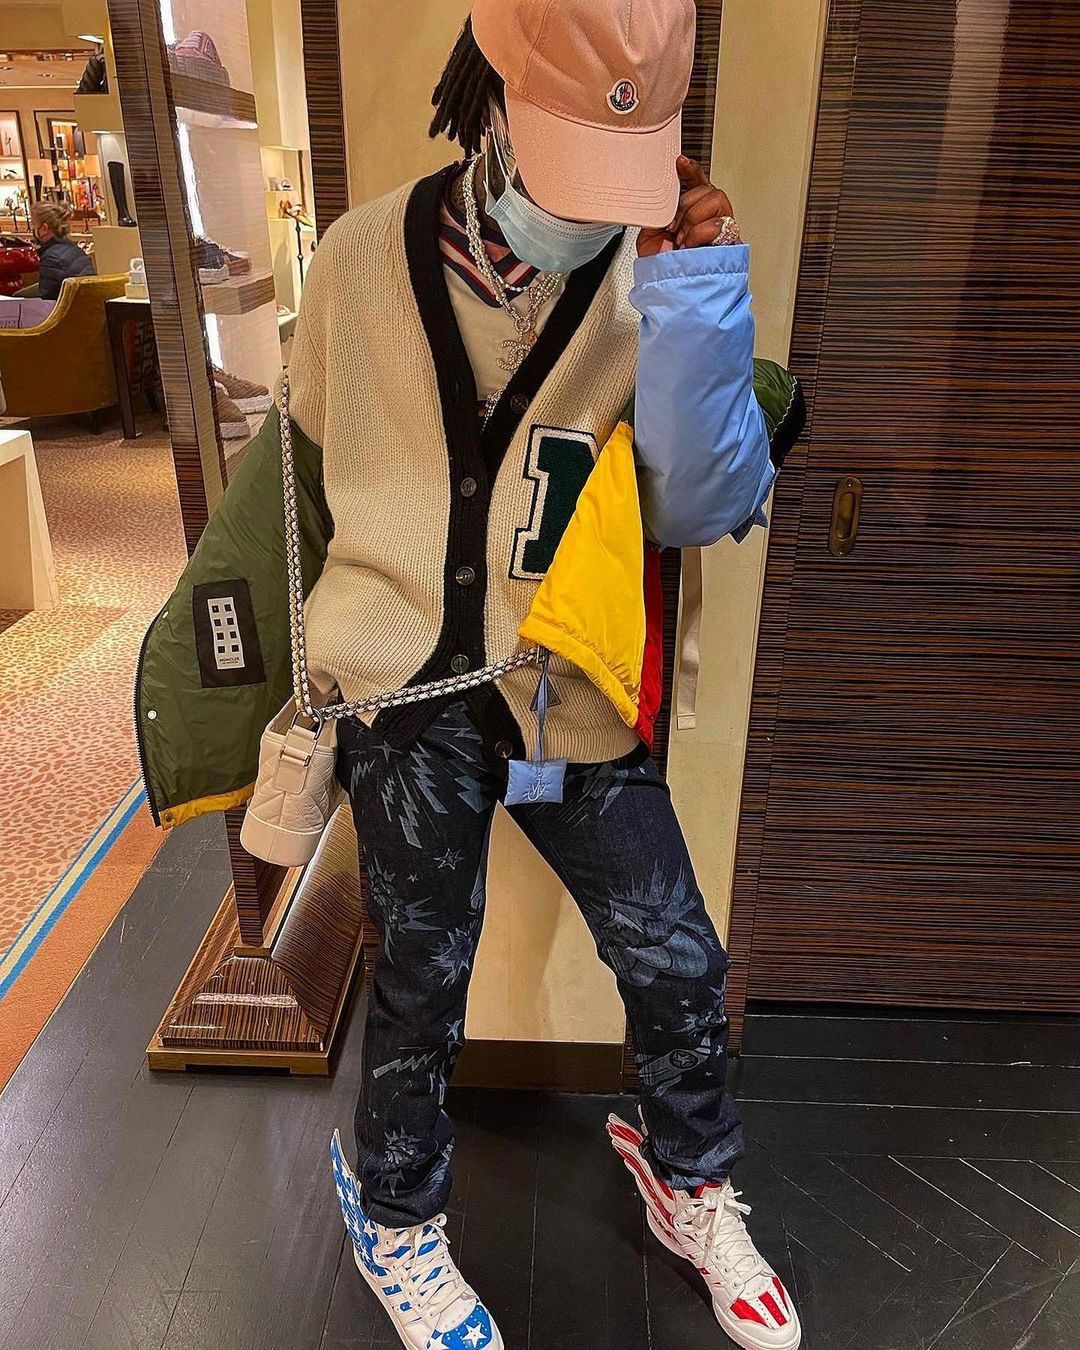 UpscaleHype - Lil Uzi Vert Carries a Chanel Bag While Wearing an